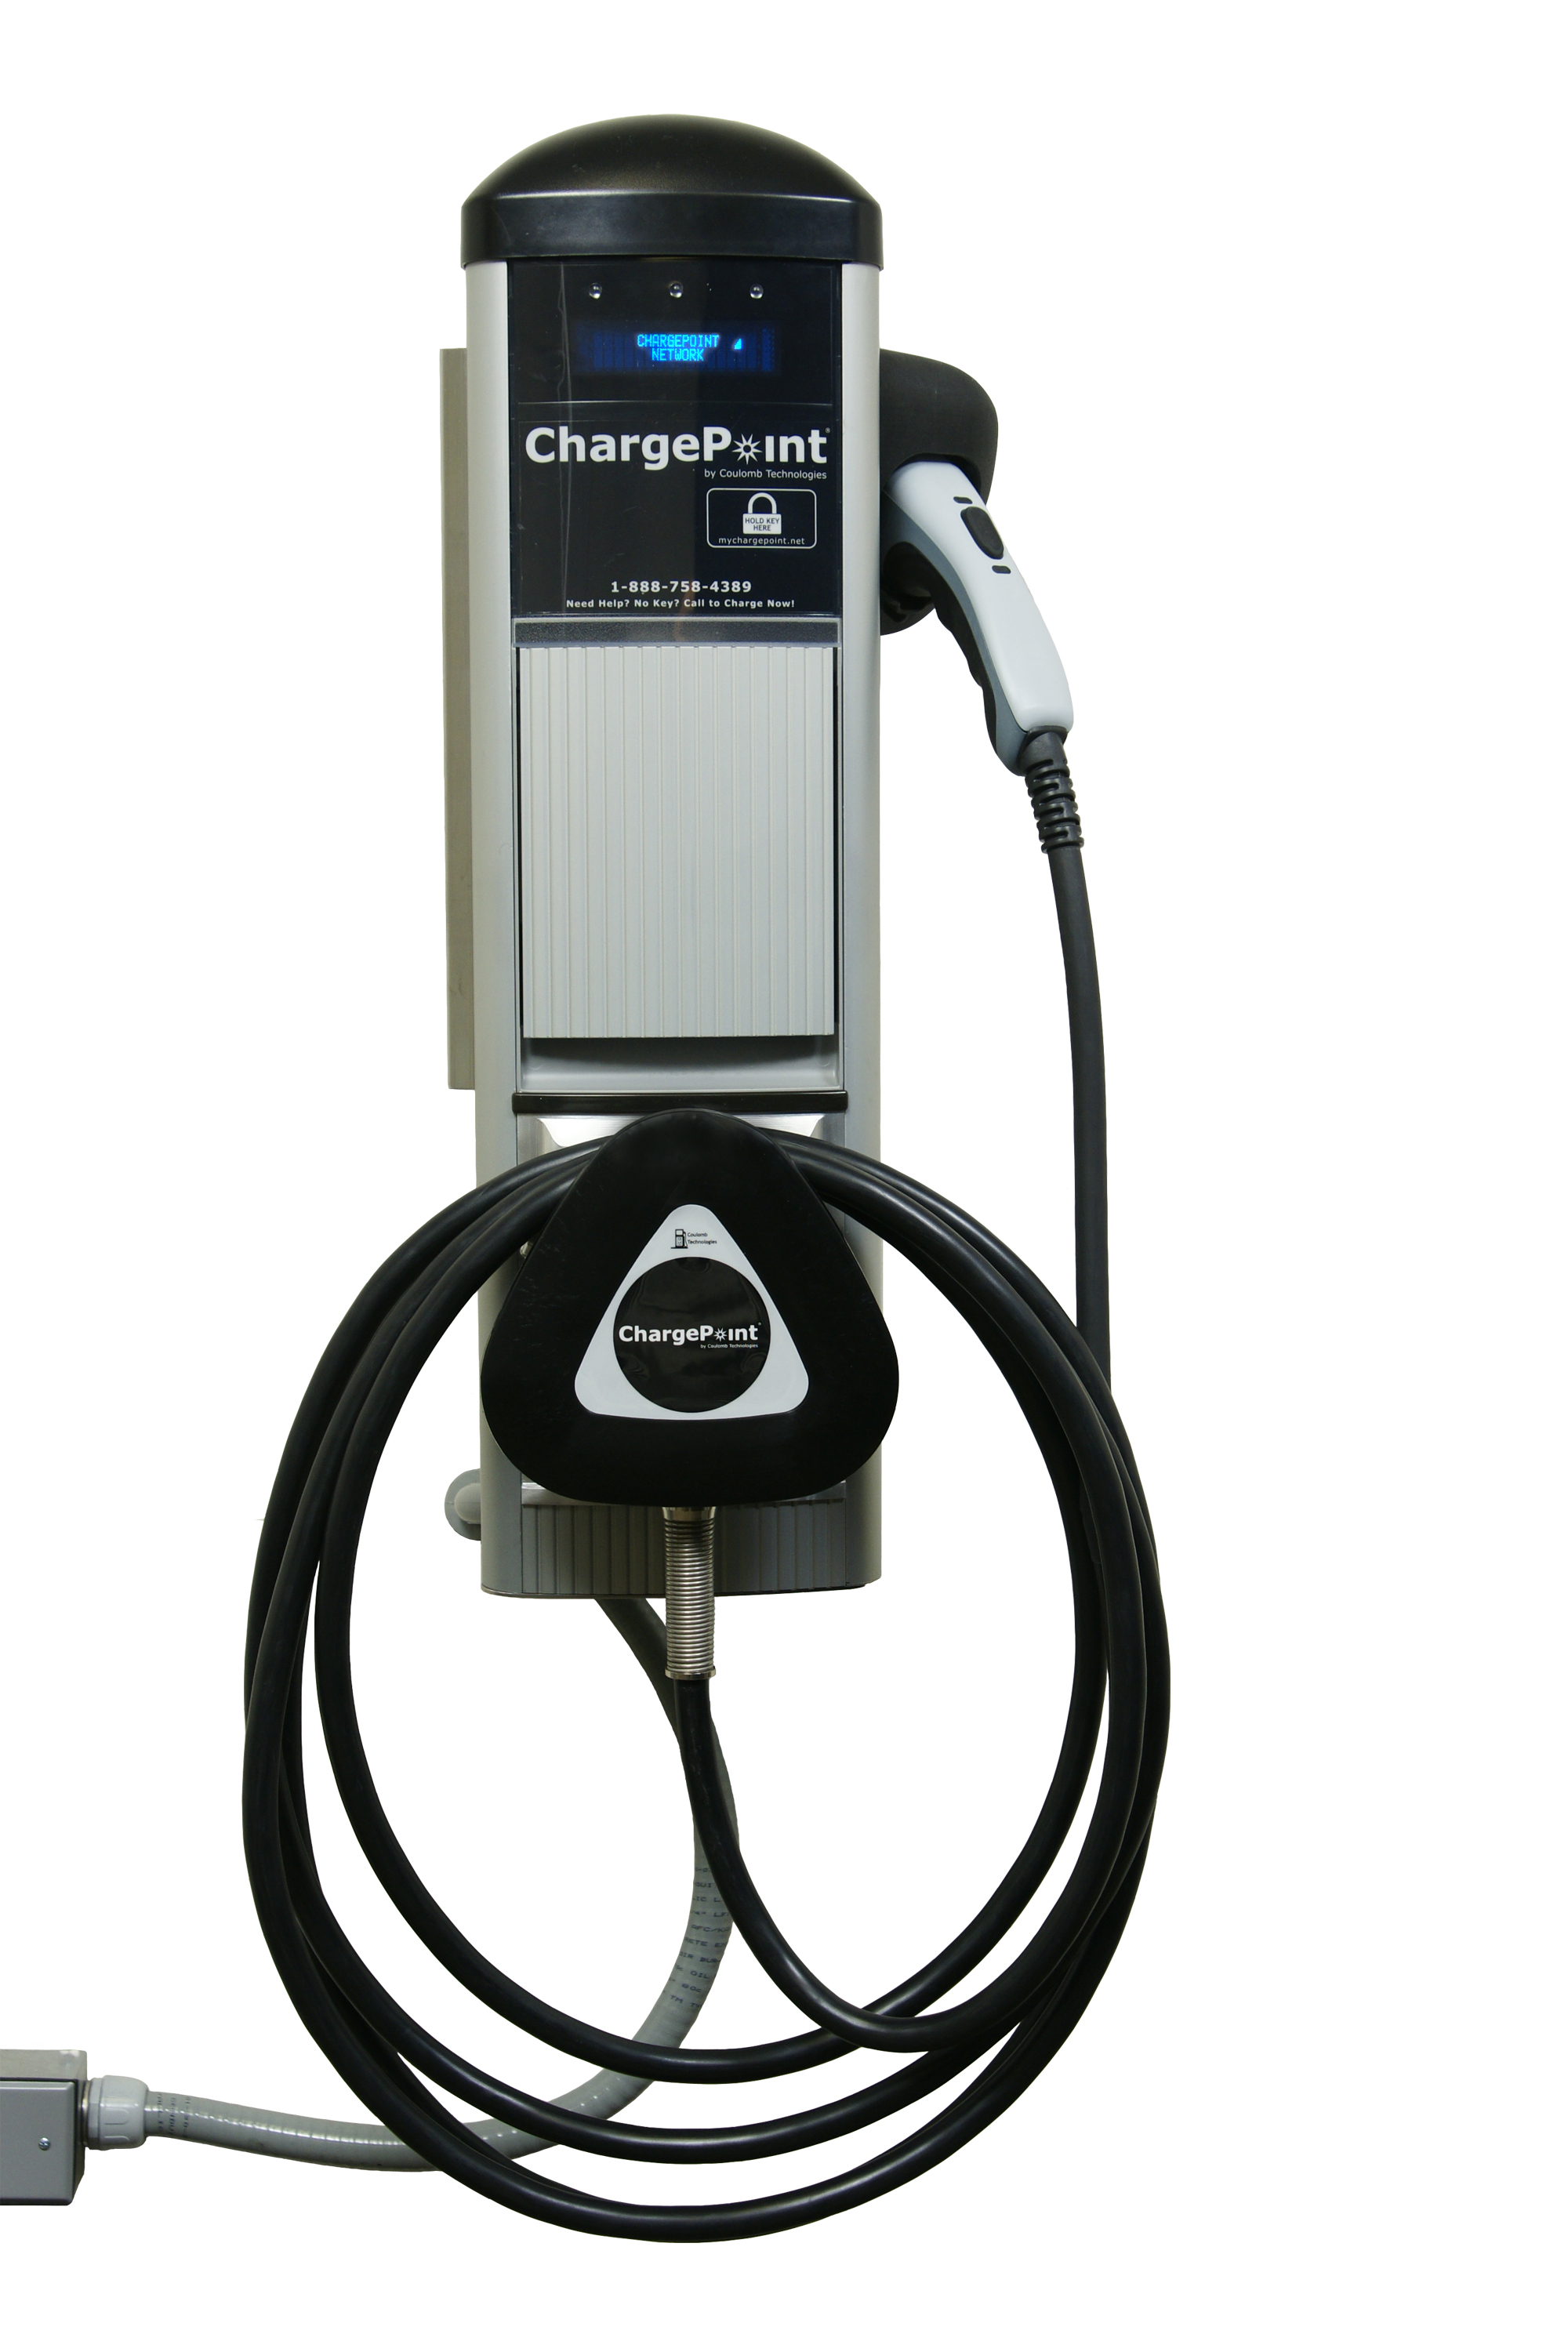 Coulomb Technologies Installs 4,600 EV Charging Stations In The U.S